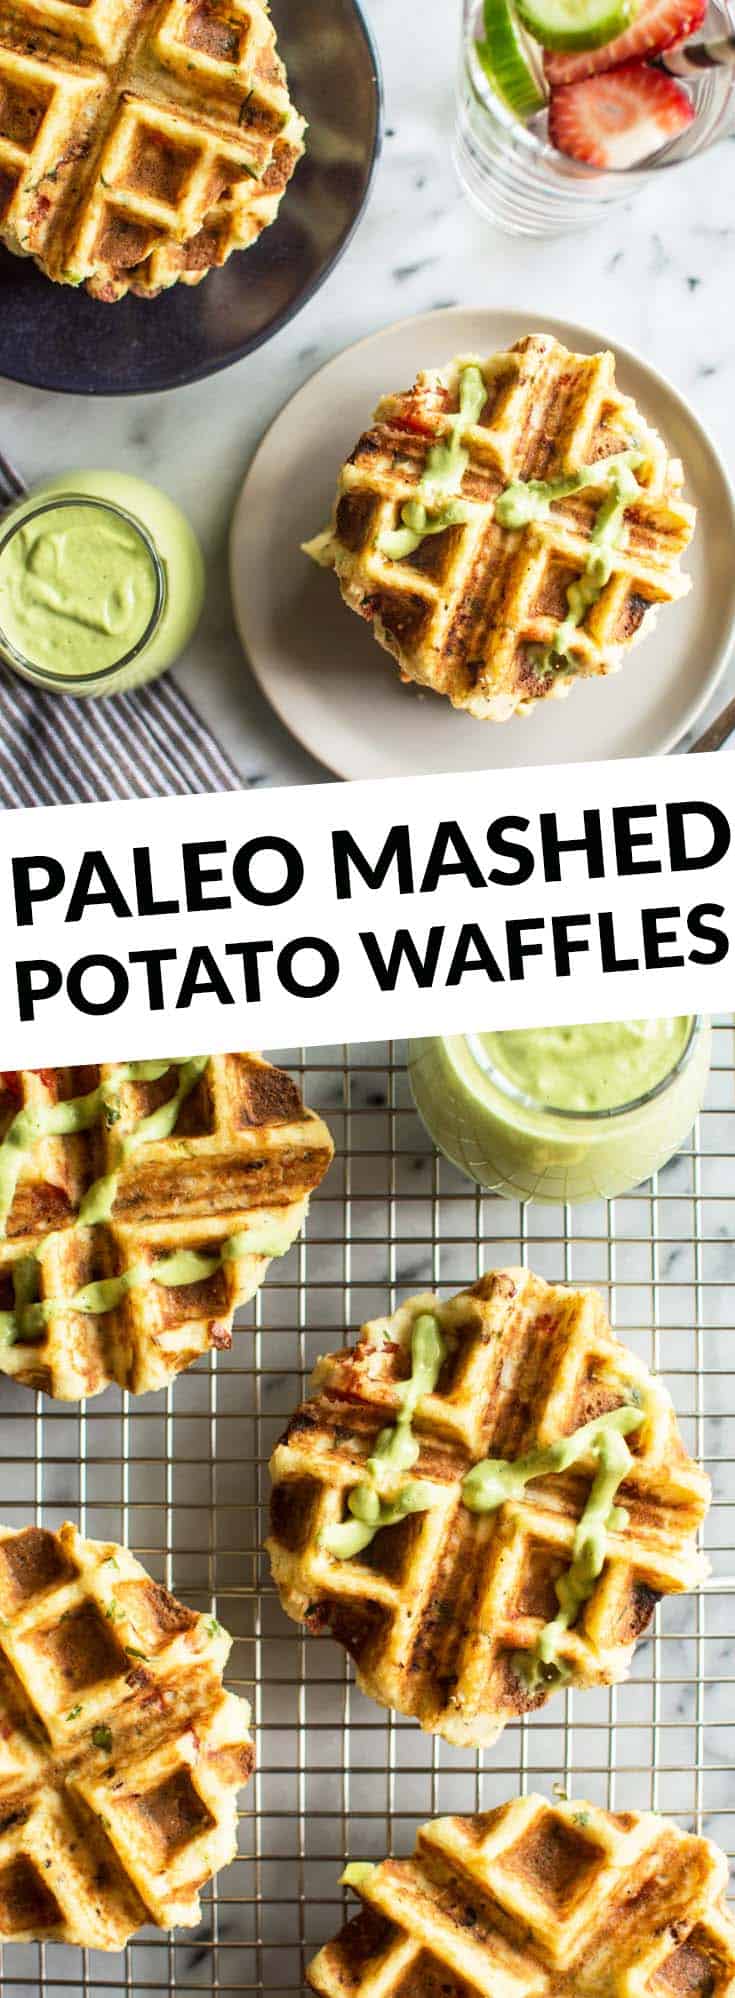 Mashed Potato Waffles - they're packed with flavor and paleo friendly! Perfect for breakfast! by @healthynibs